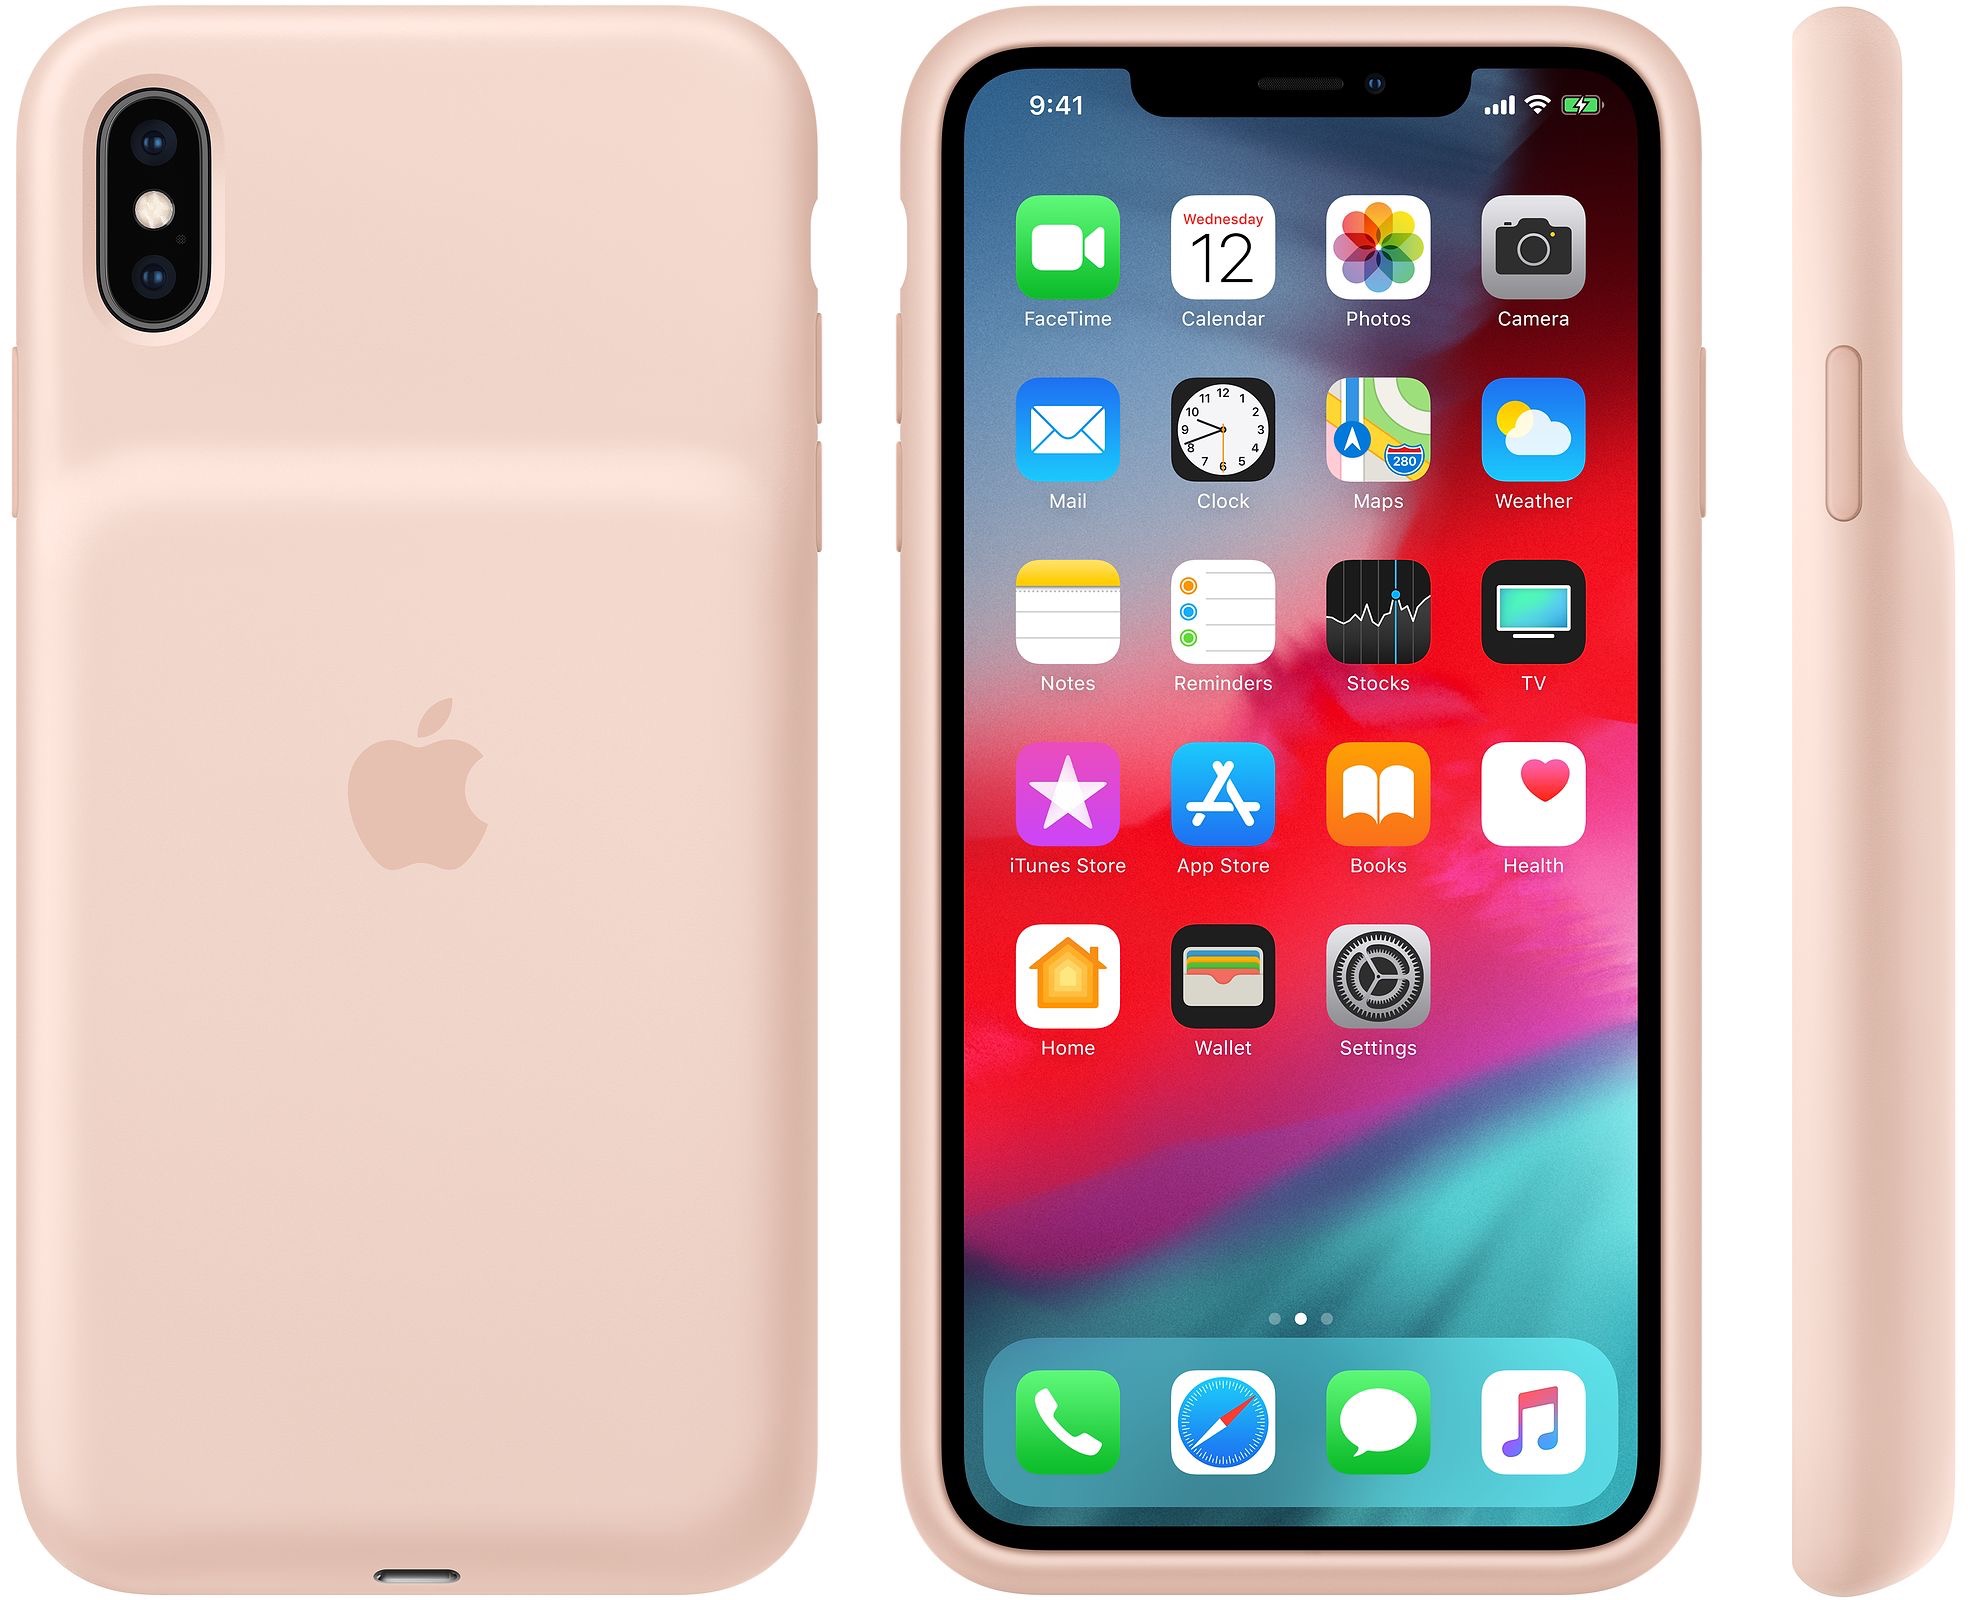 Smart battery case for iPhone XS in pink color